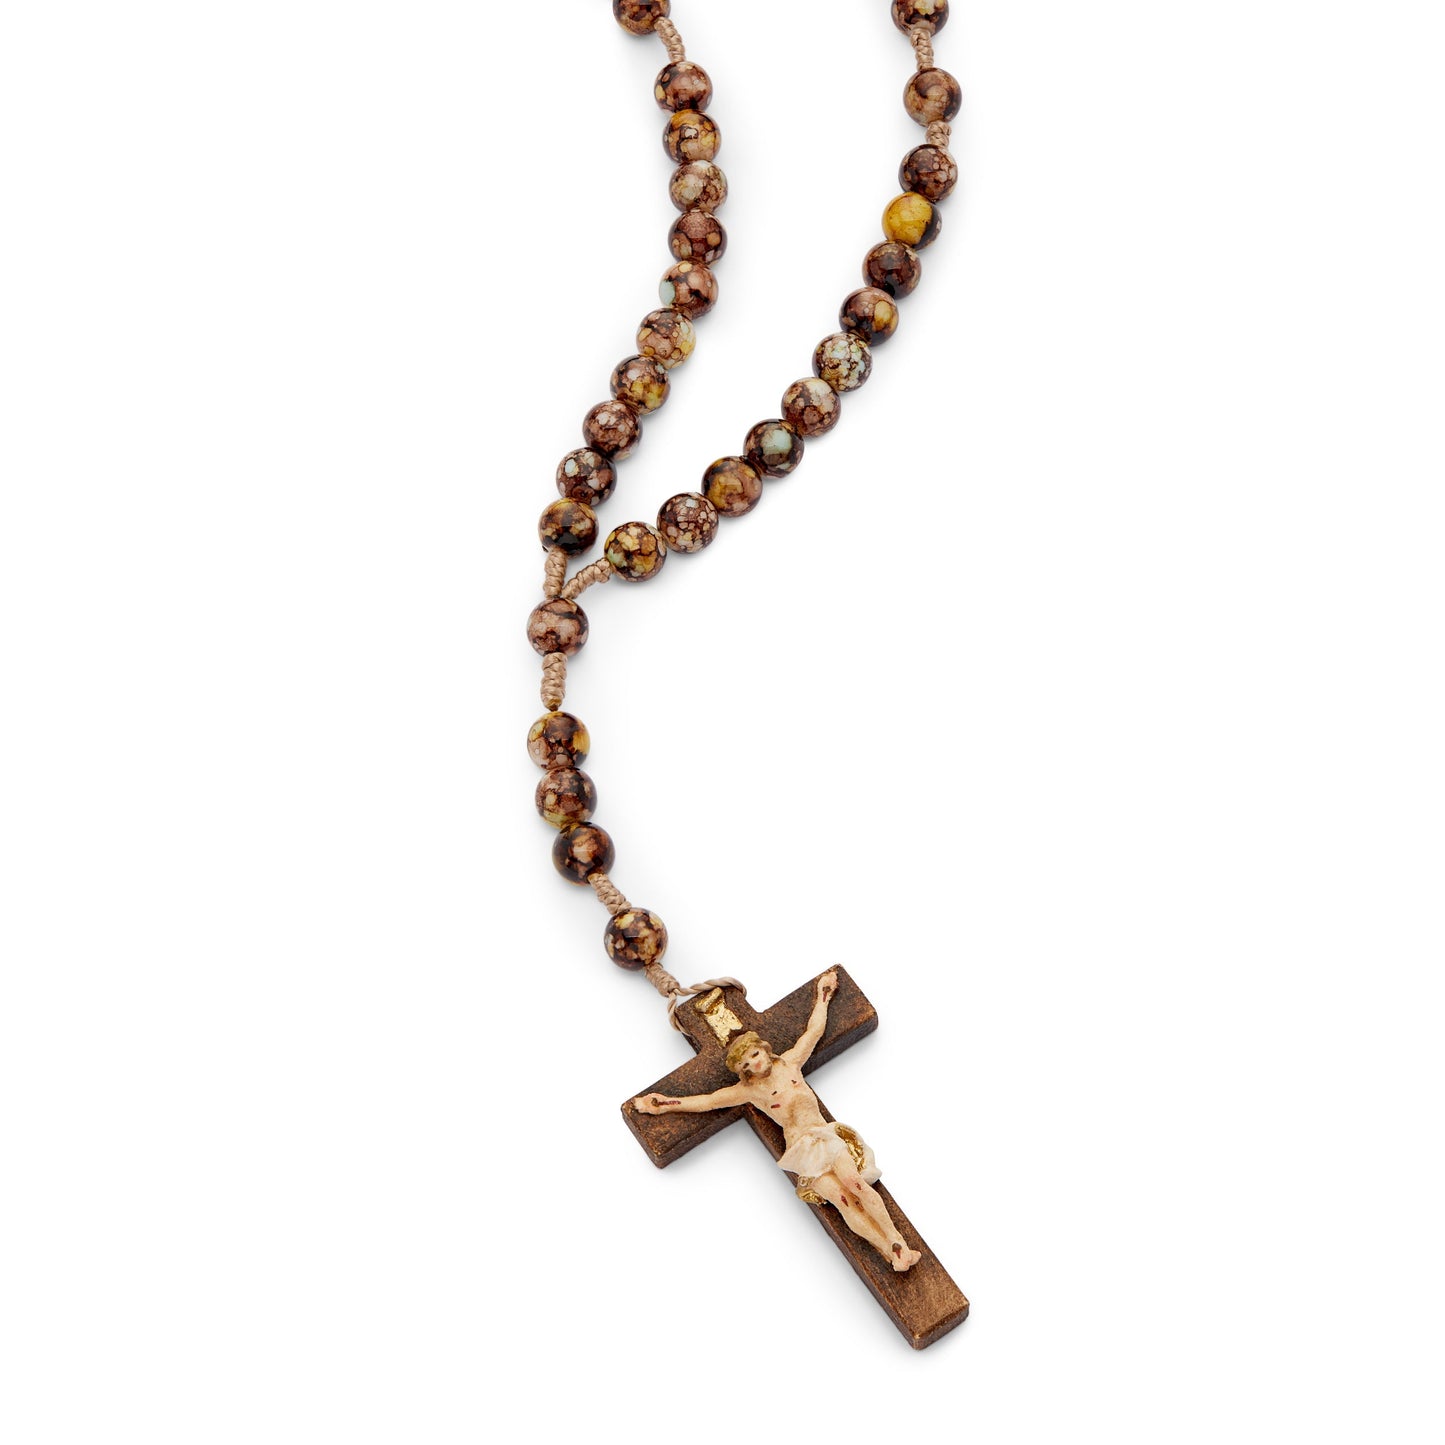 MONDO CATTOLICO Prayer Beads 35.5 cm (13.97 in) / 7 mm (0.27 in) Resin Rosary in Rope with Handpainted Crucifix